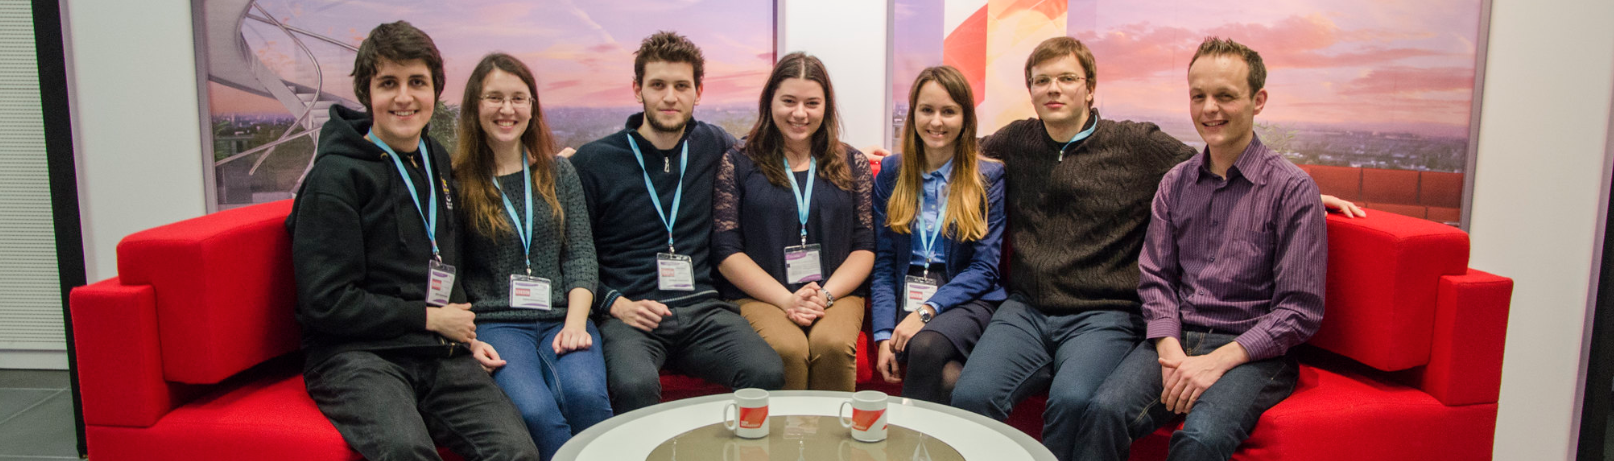 Posing on the BBC Breakfast red sofa with the winning student team at the BBC / Barclays University Technology Challenge (UTC) in MediaCityUK, Salford, Greater Manchester